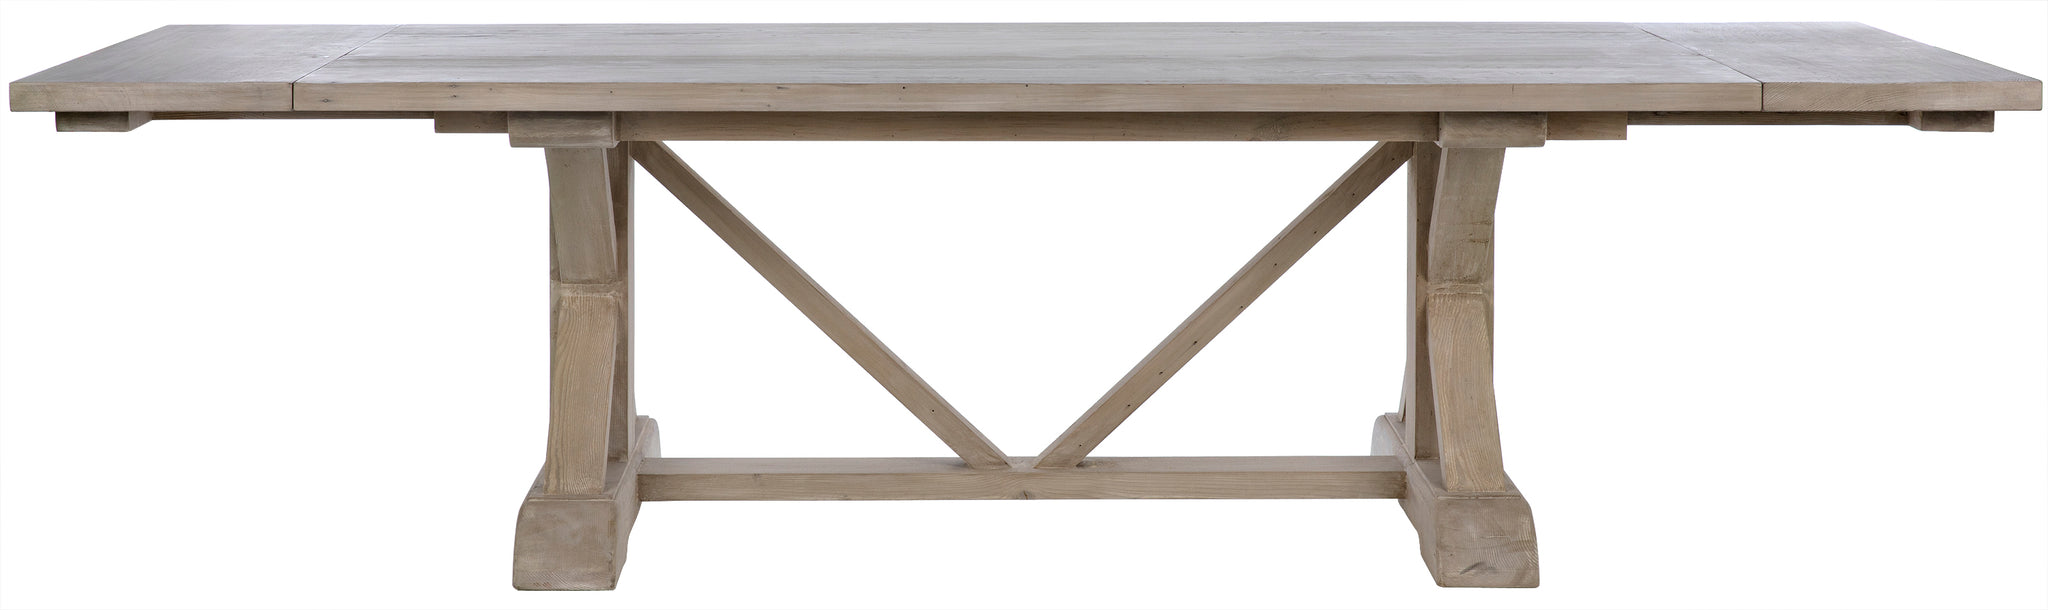 Rosa Extension Dining Table -  4 sizes